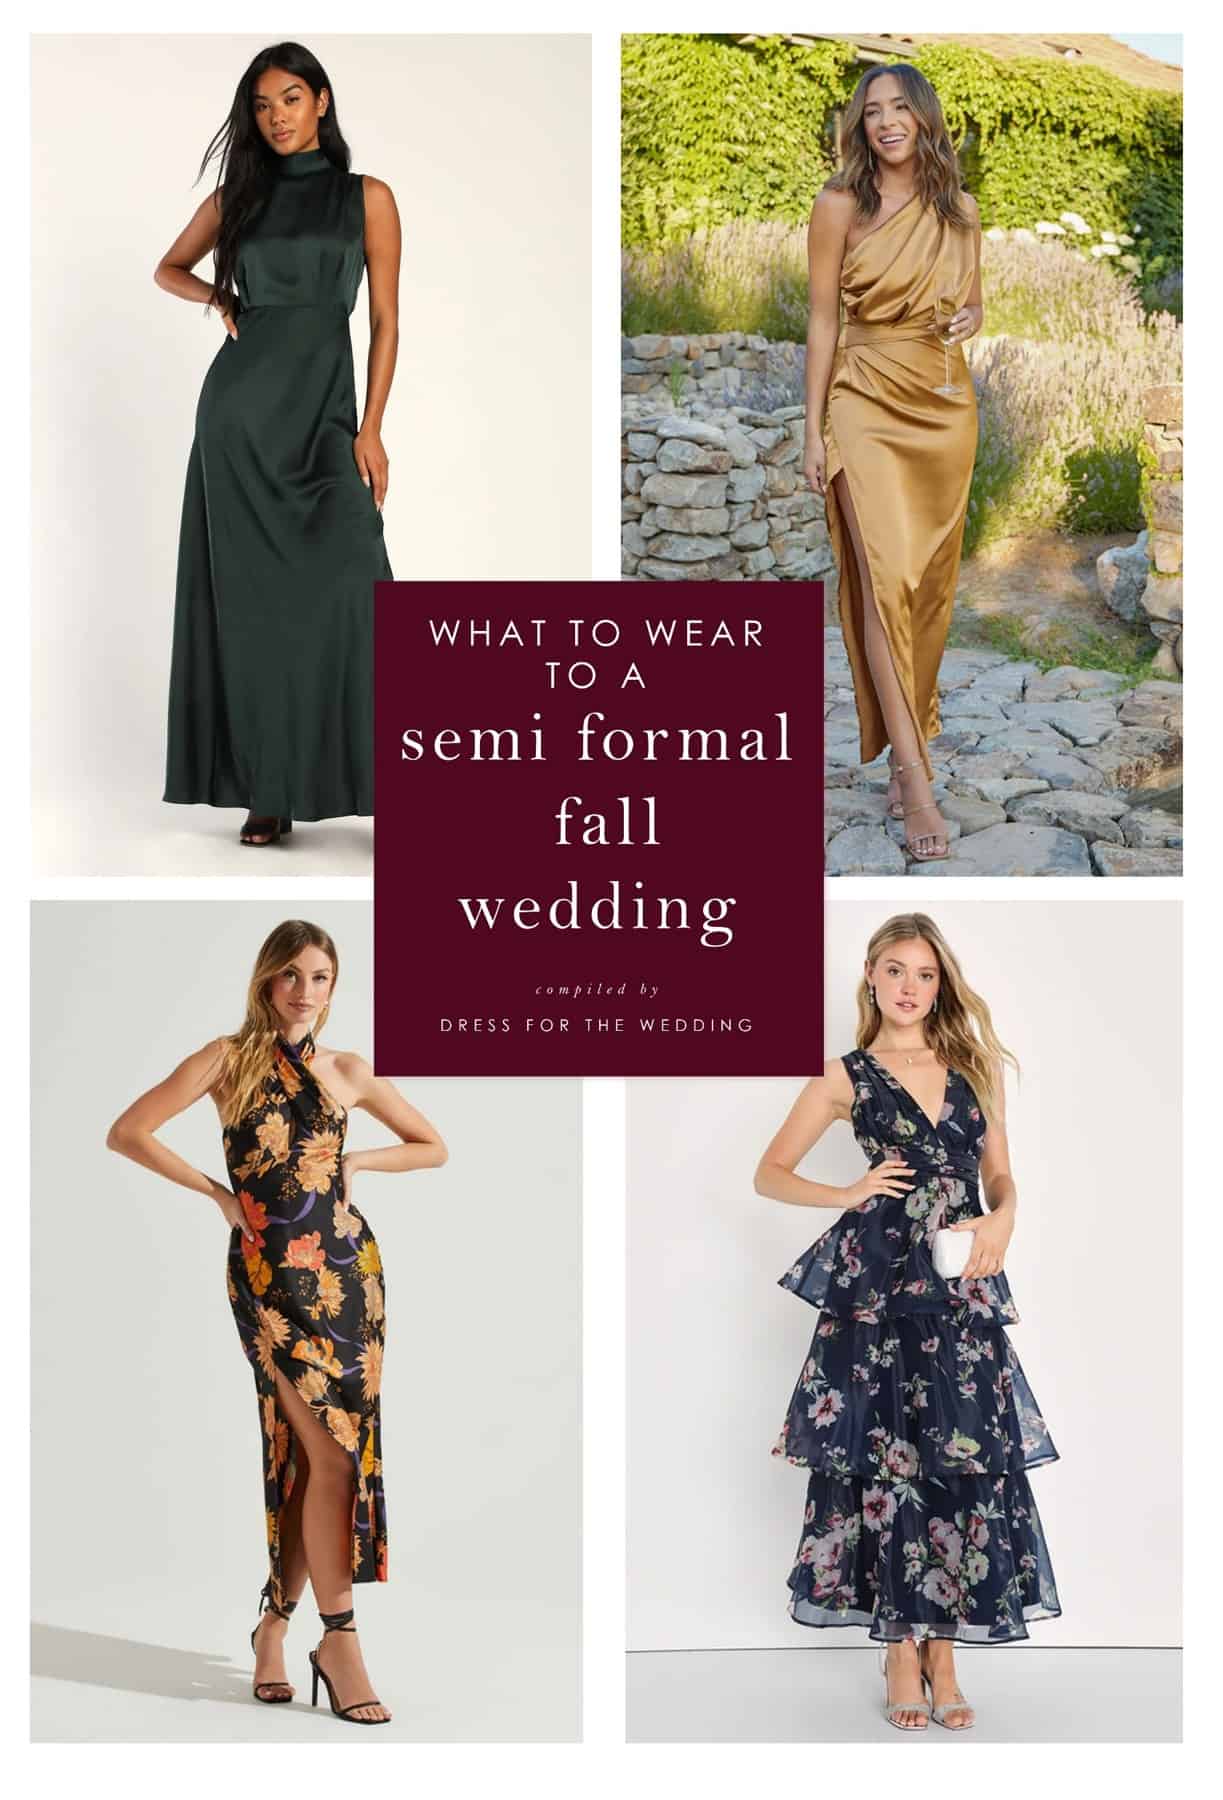 Cocktail Wedding Attire for Men and Women